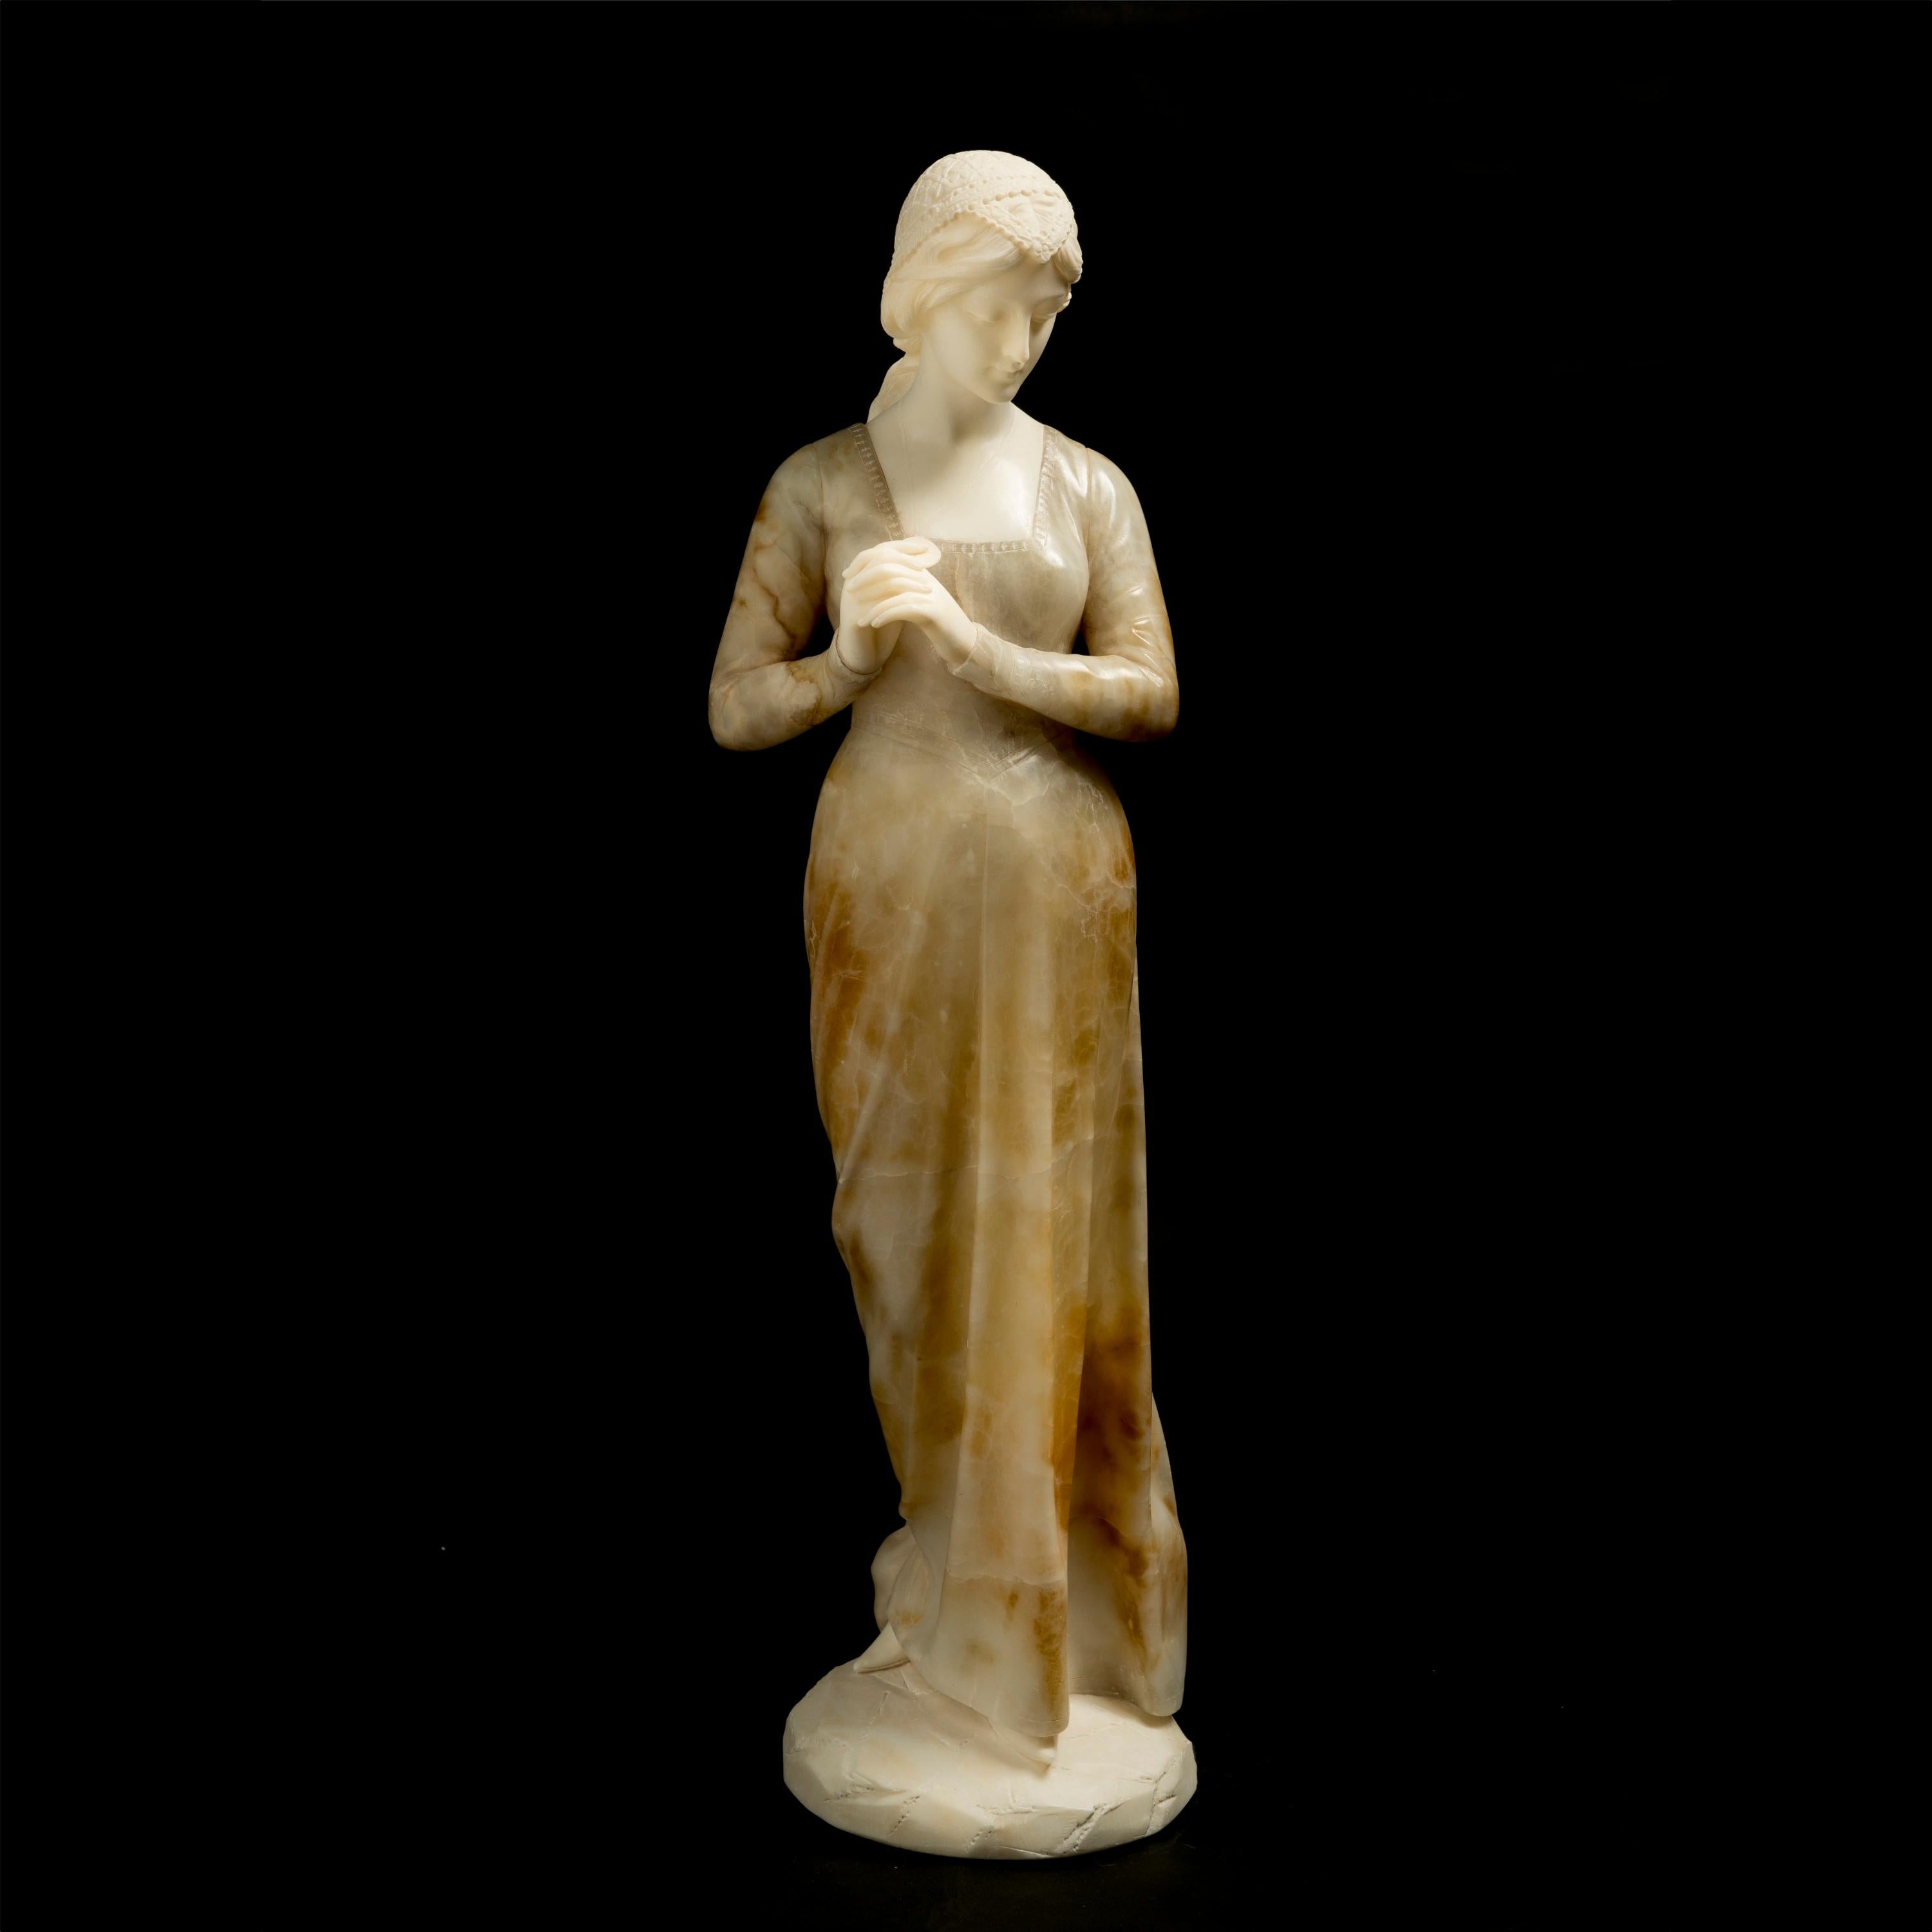 A Carved Alabaster Figure
By Emilio Fiaschi of Florence

This Italian alabaster sculpture by Fiaschi displays his skillful mastery by accentuating the grace of the female form through the subtle highlighting of the waistline. Meanwhile, juxtaposed